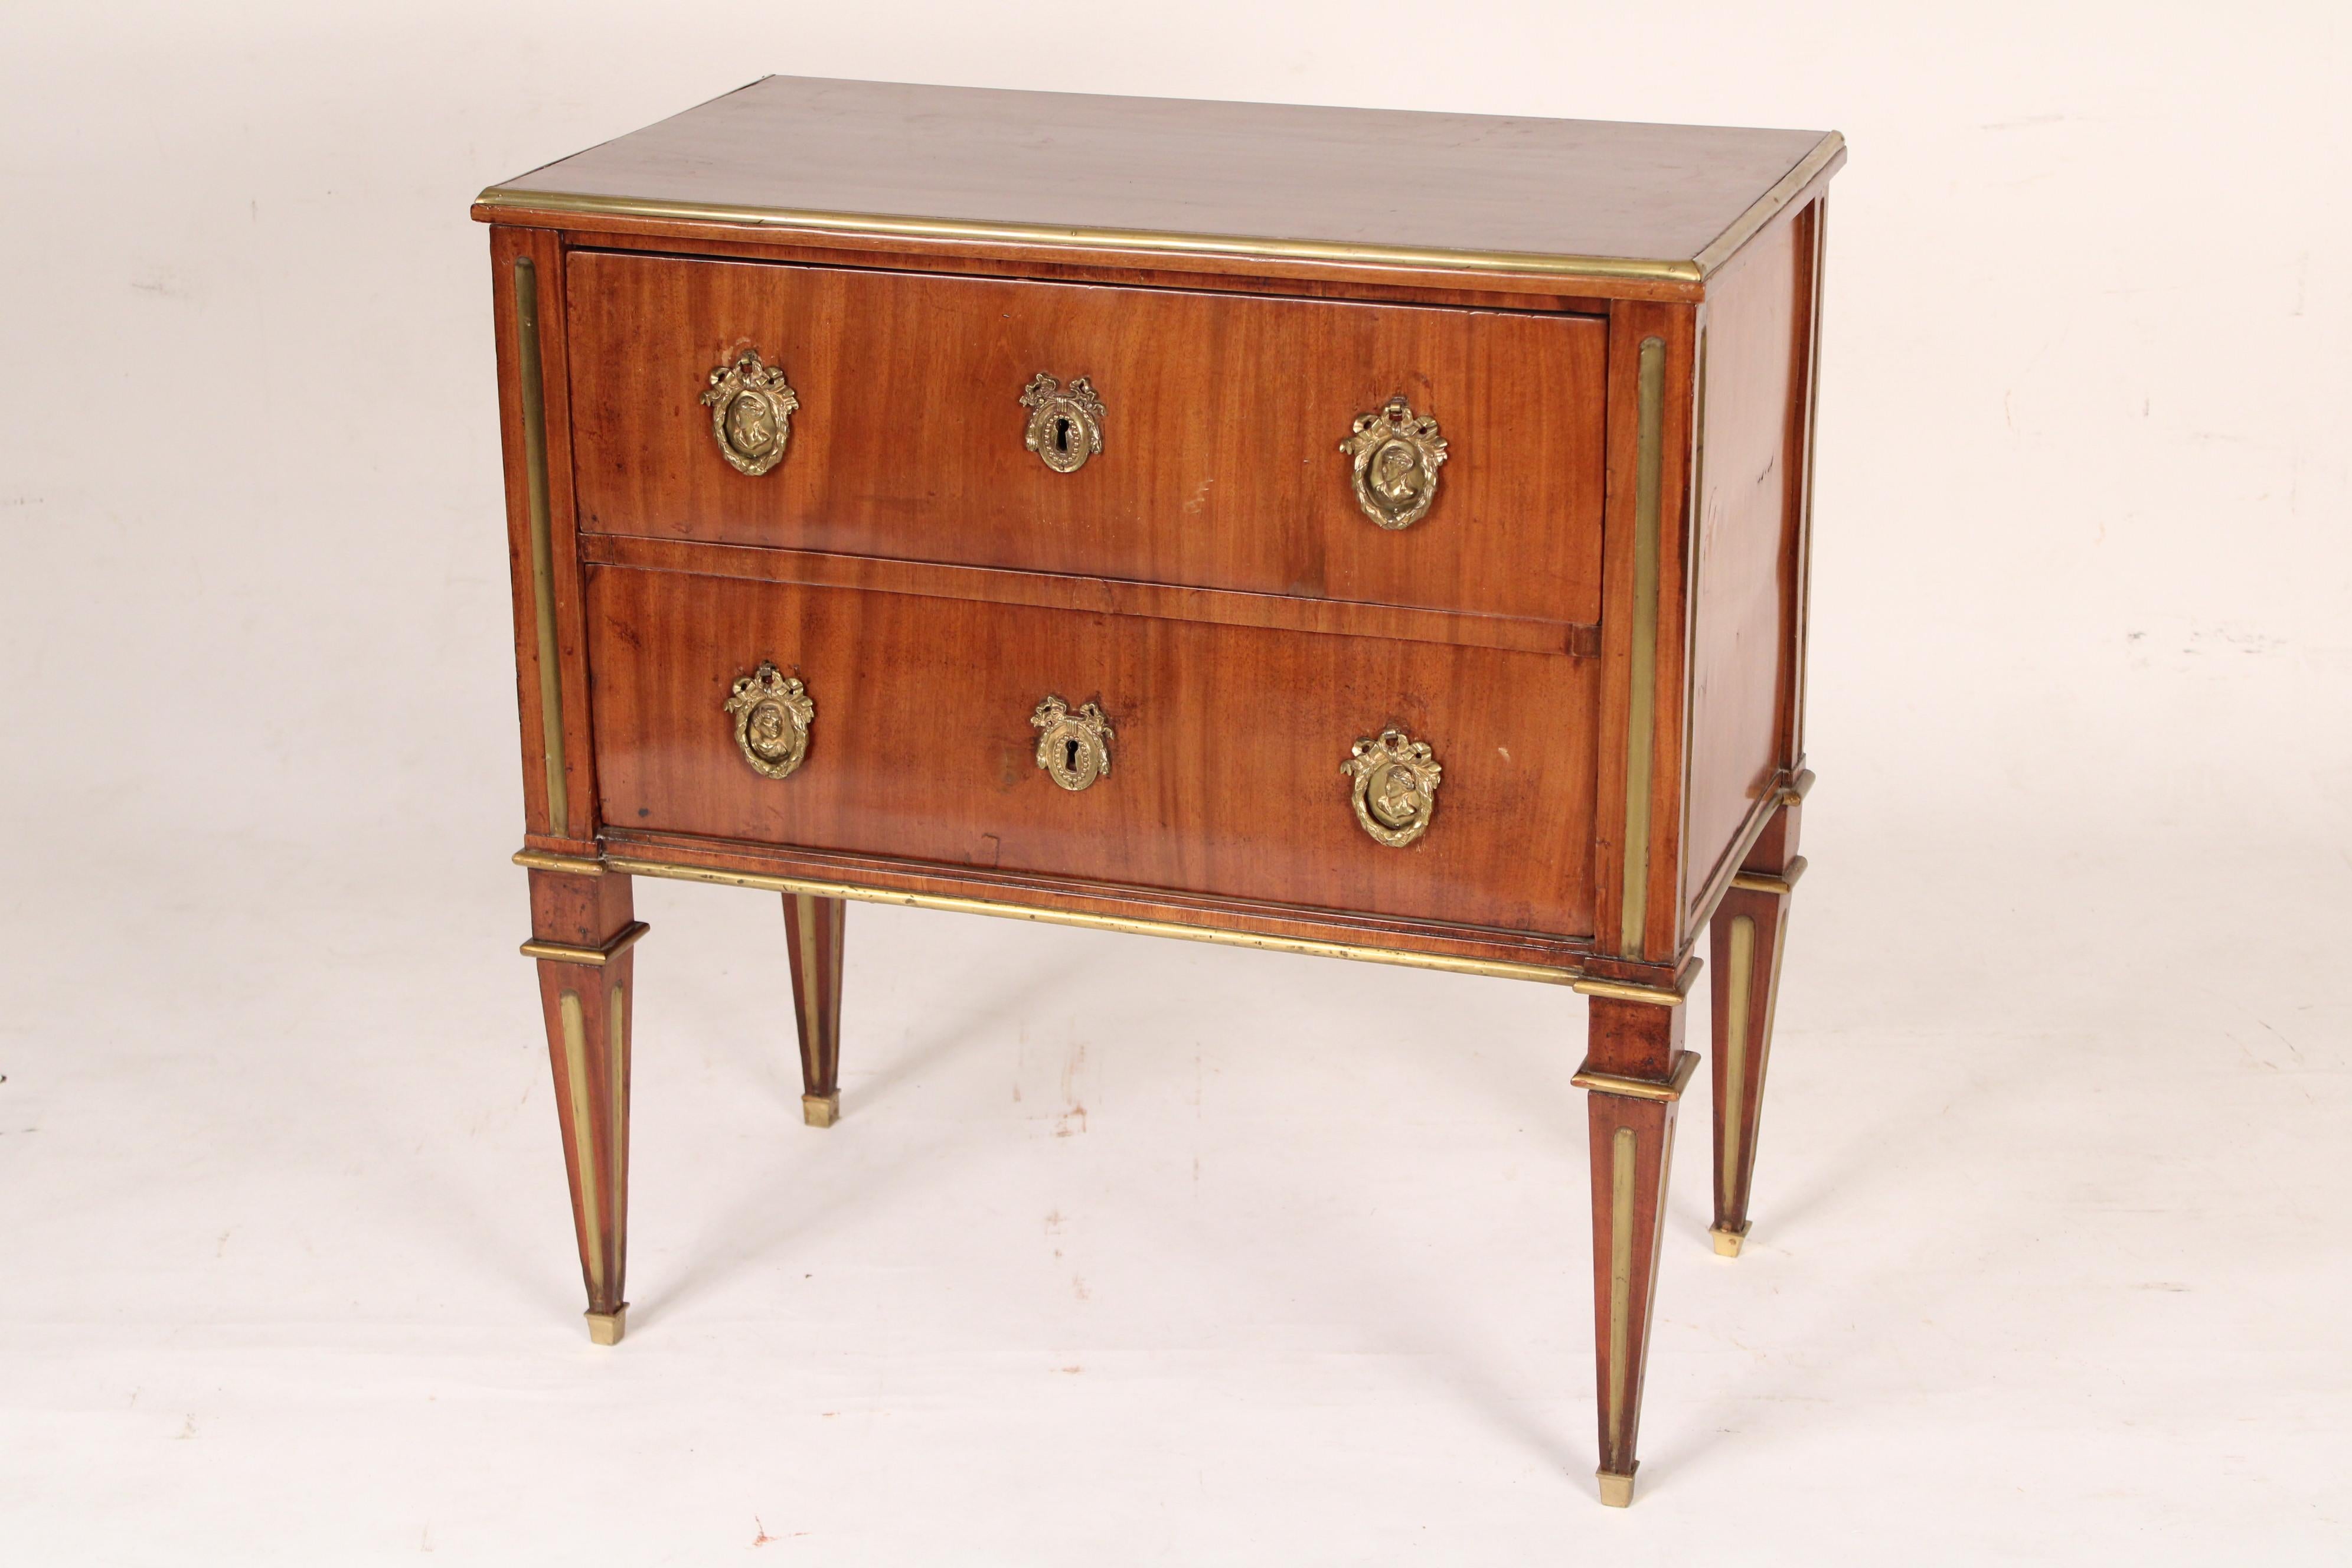 Russian or Swedish Louis XVI mahogany chest of drawers with brass inlay, circa 1800. Having a rectangular top with thumb molded brass borders, two grain matched drawers, resting on four square tapered legs with brass inlay.